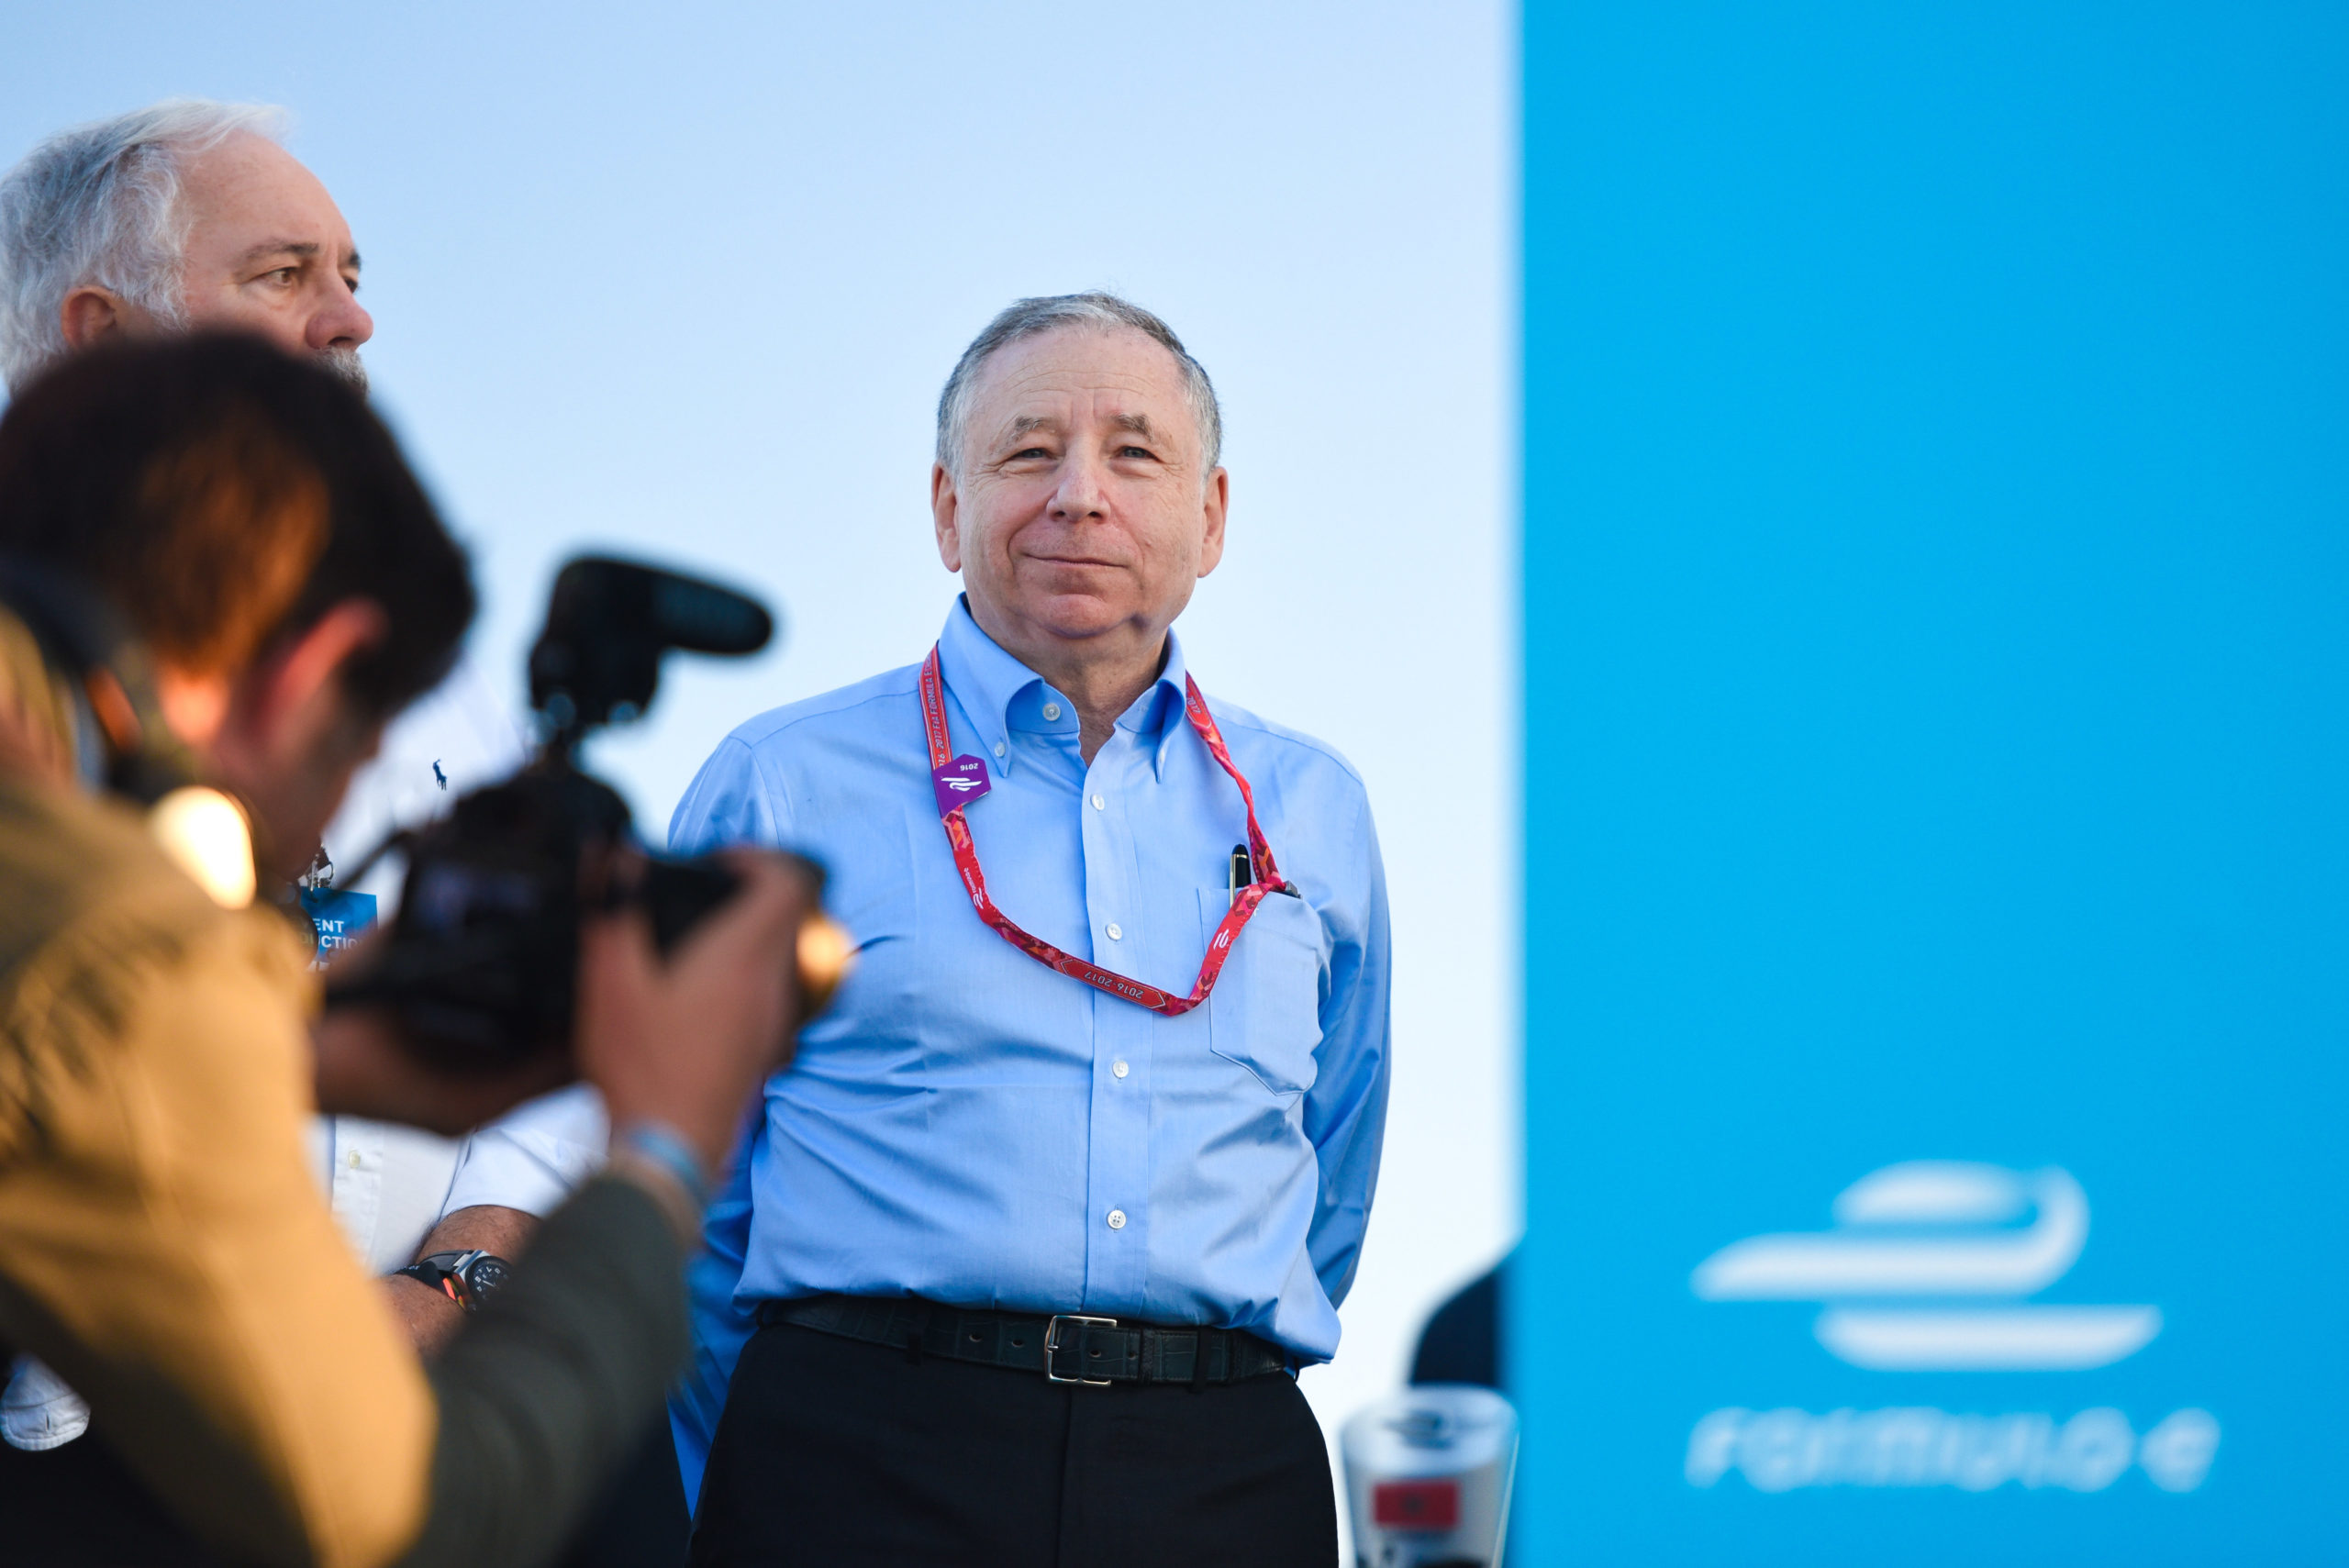 formula e’s new hire could avert another manufacturer exodus